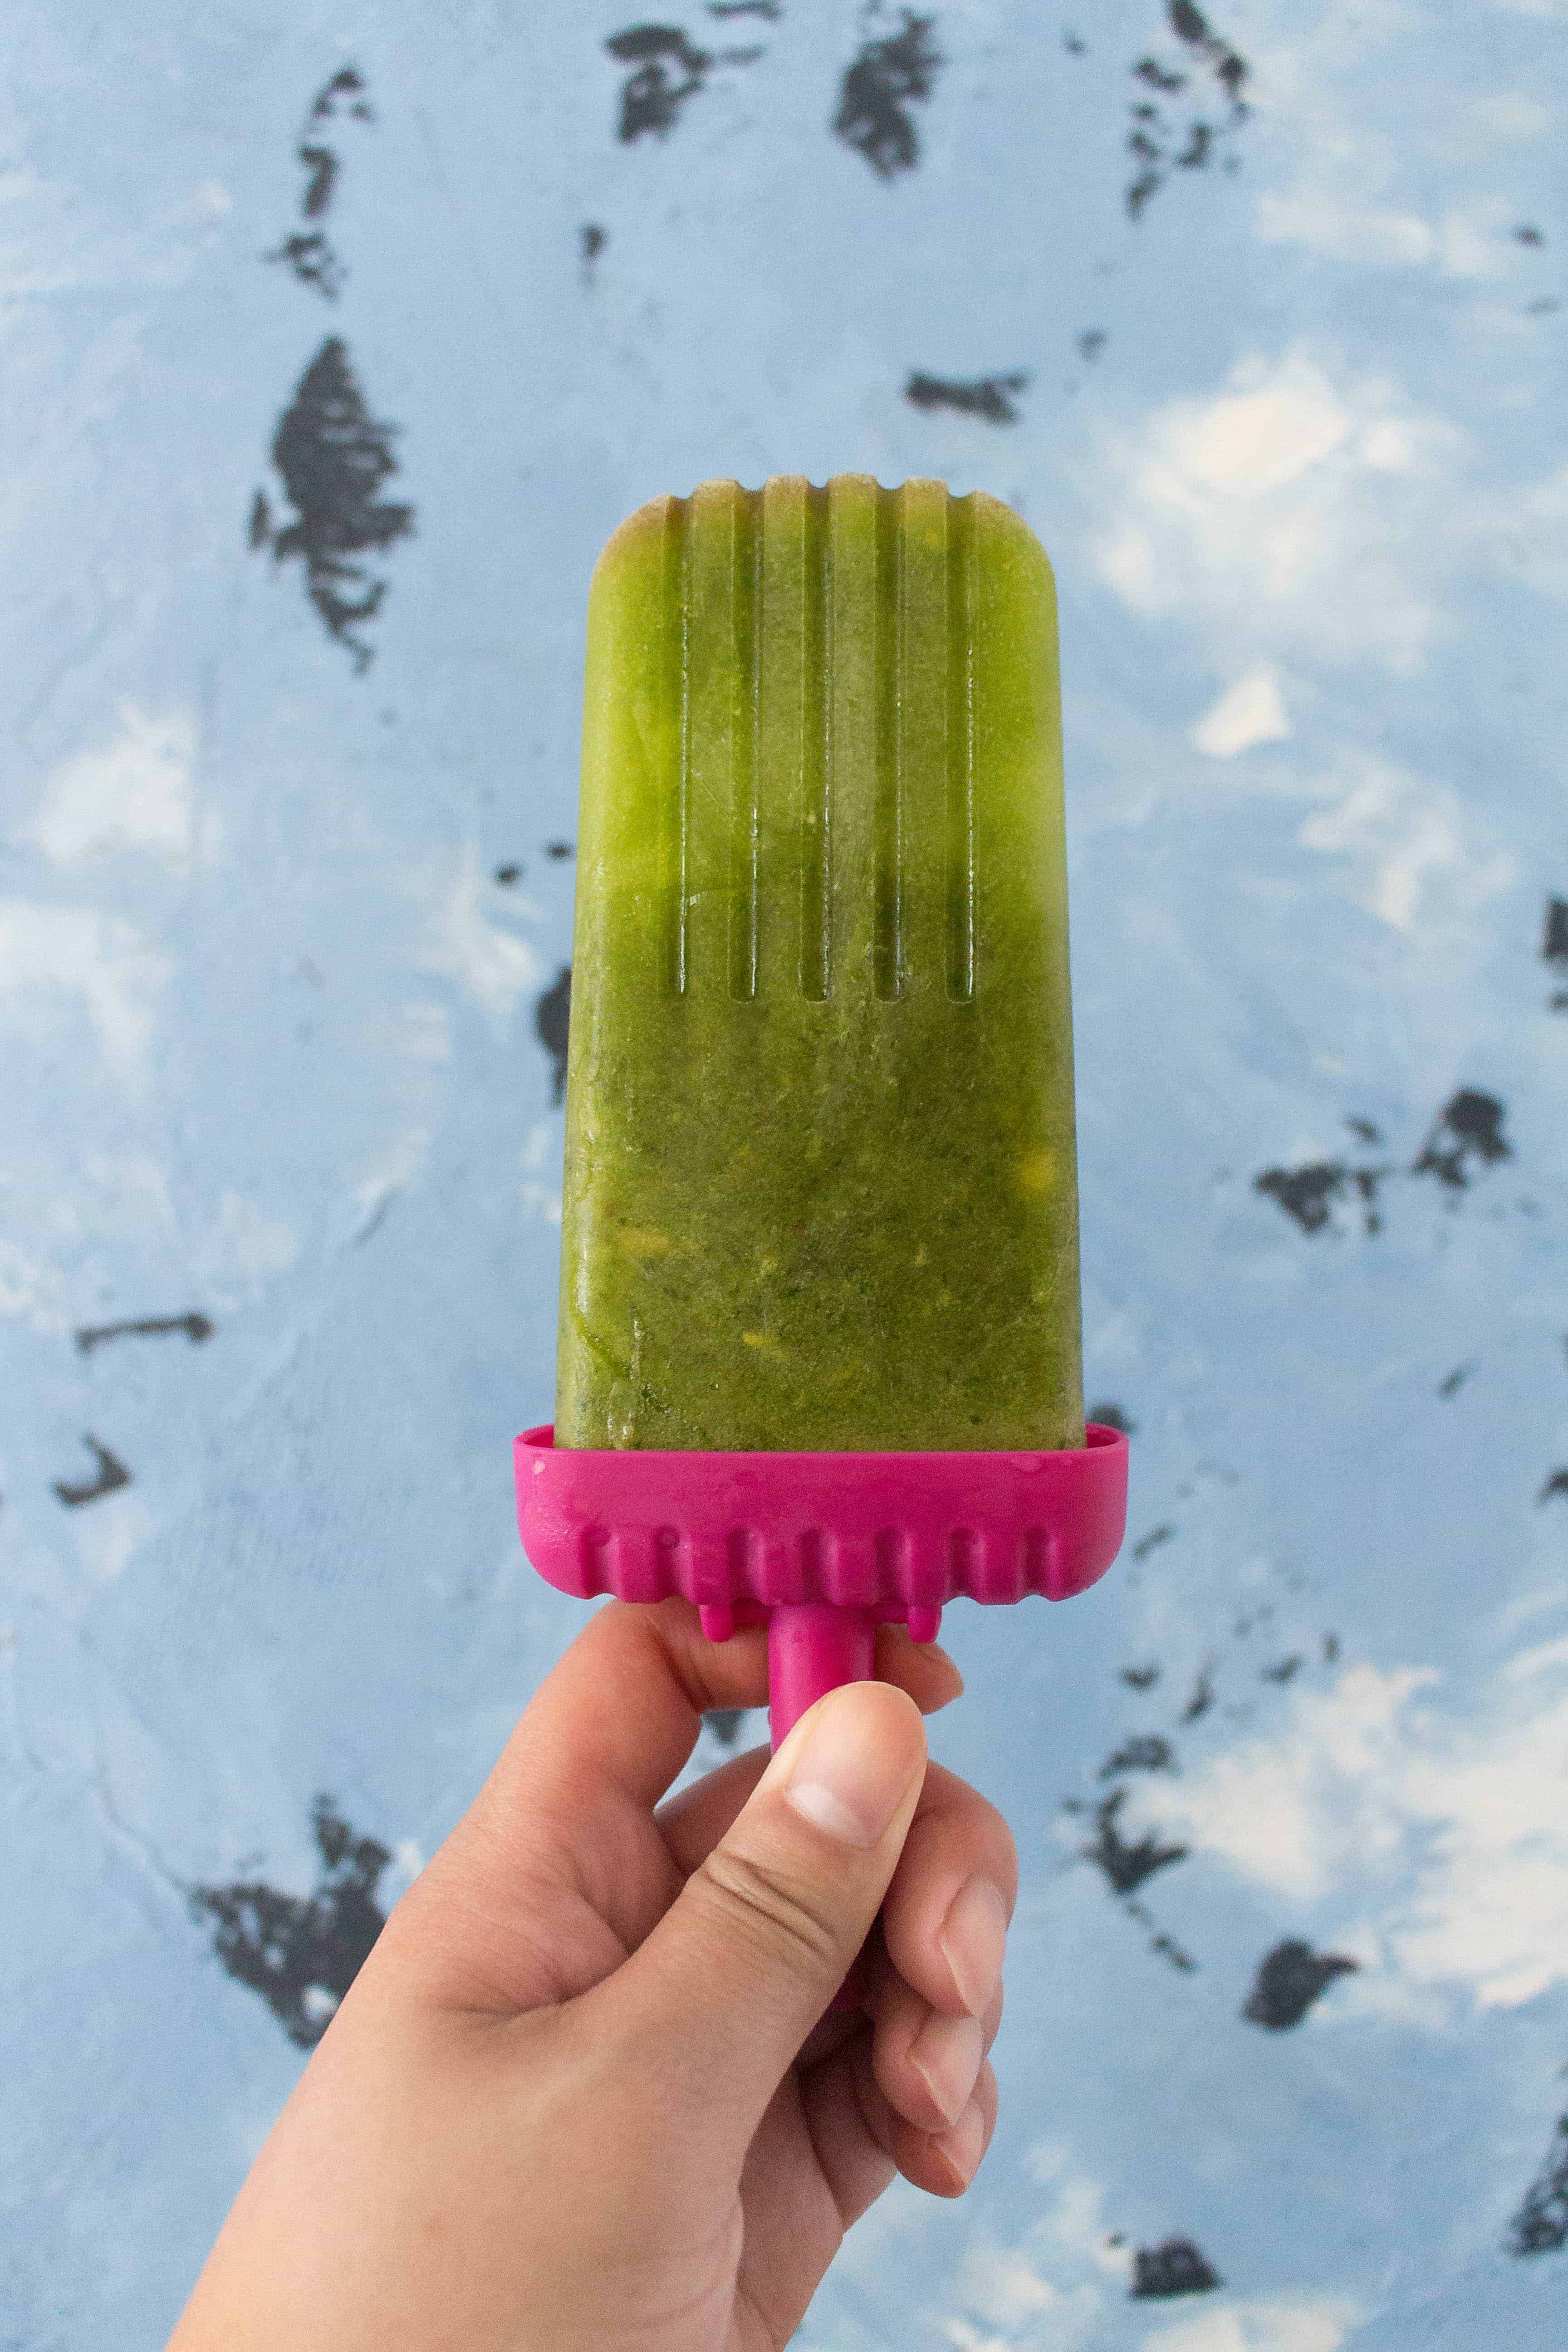 This Runner's Popsicle is the perfect popsicle for you to come home to after a hot summer run or as your pre-run fuel.